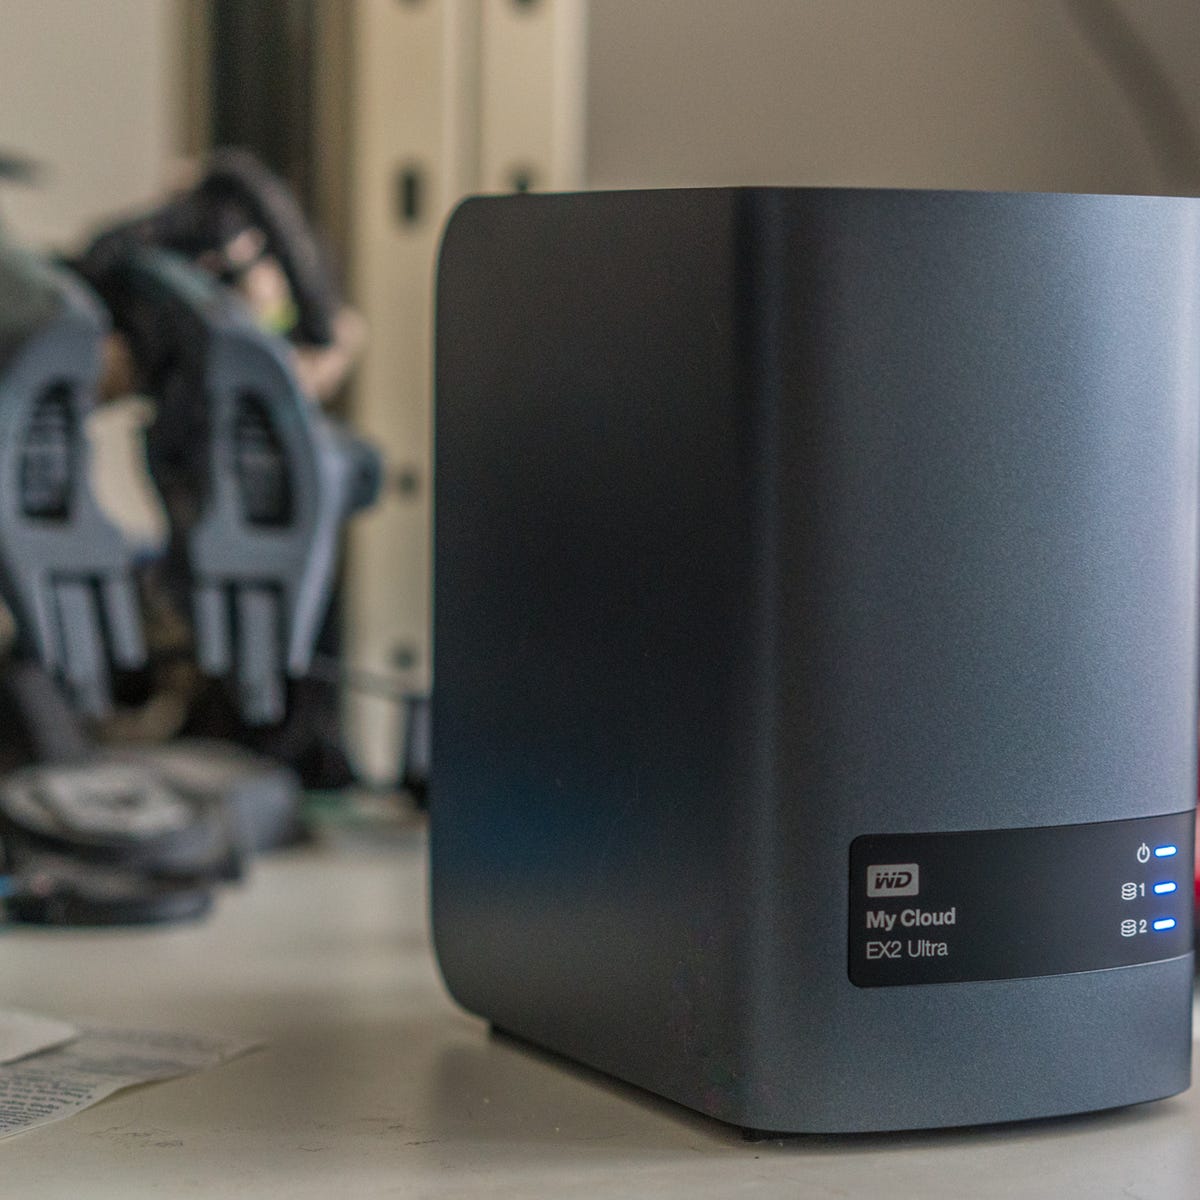 WD My Cloud EX2 Ultra review: Western Digital's My Cloud EX2 Ultra keeps  network storage simple (hands-on) - CNET